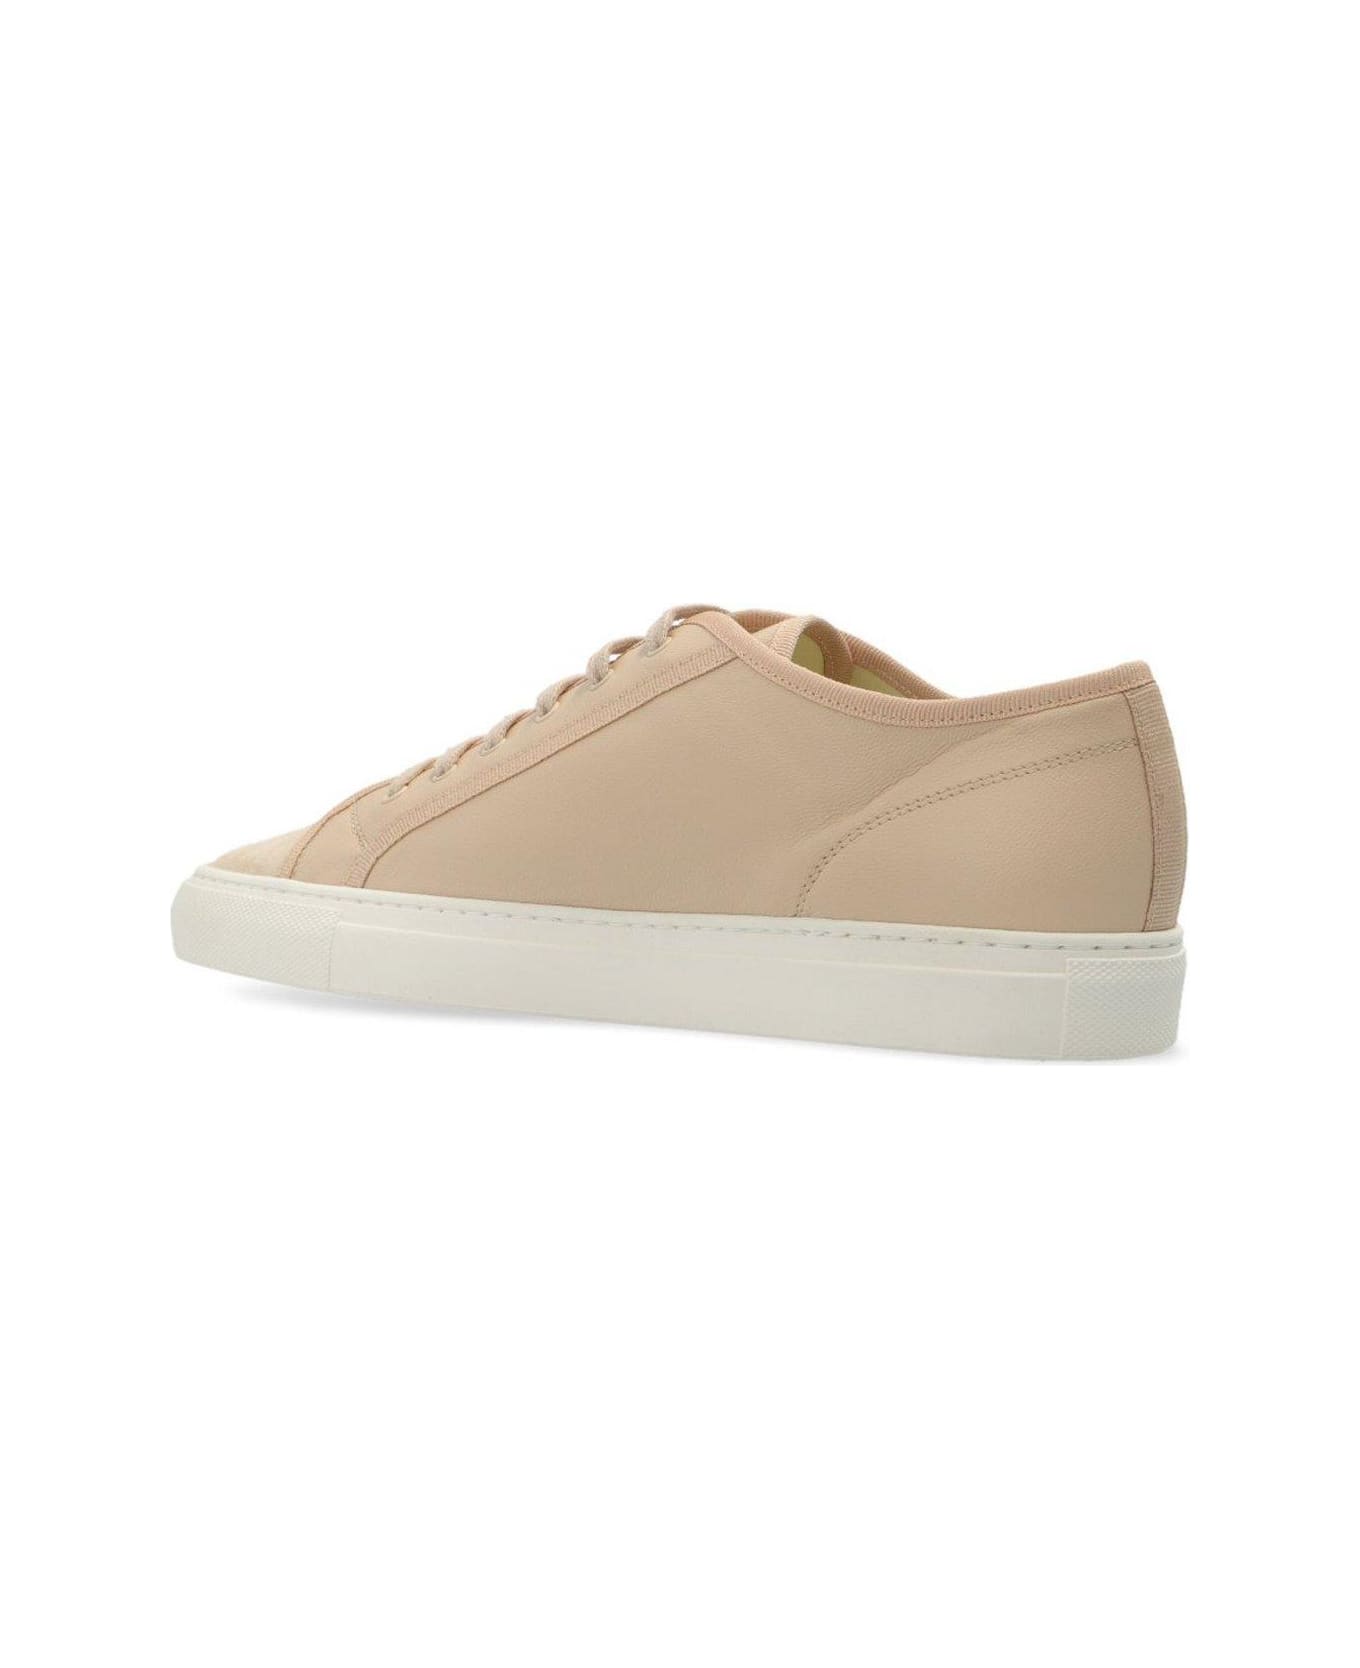 Common Projects Tournament Low-top Sneakers - Beige スニーカー